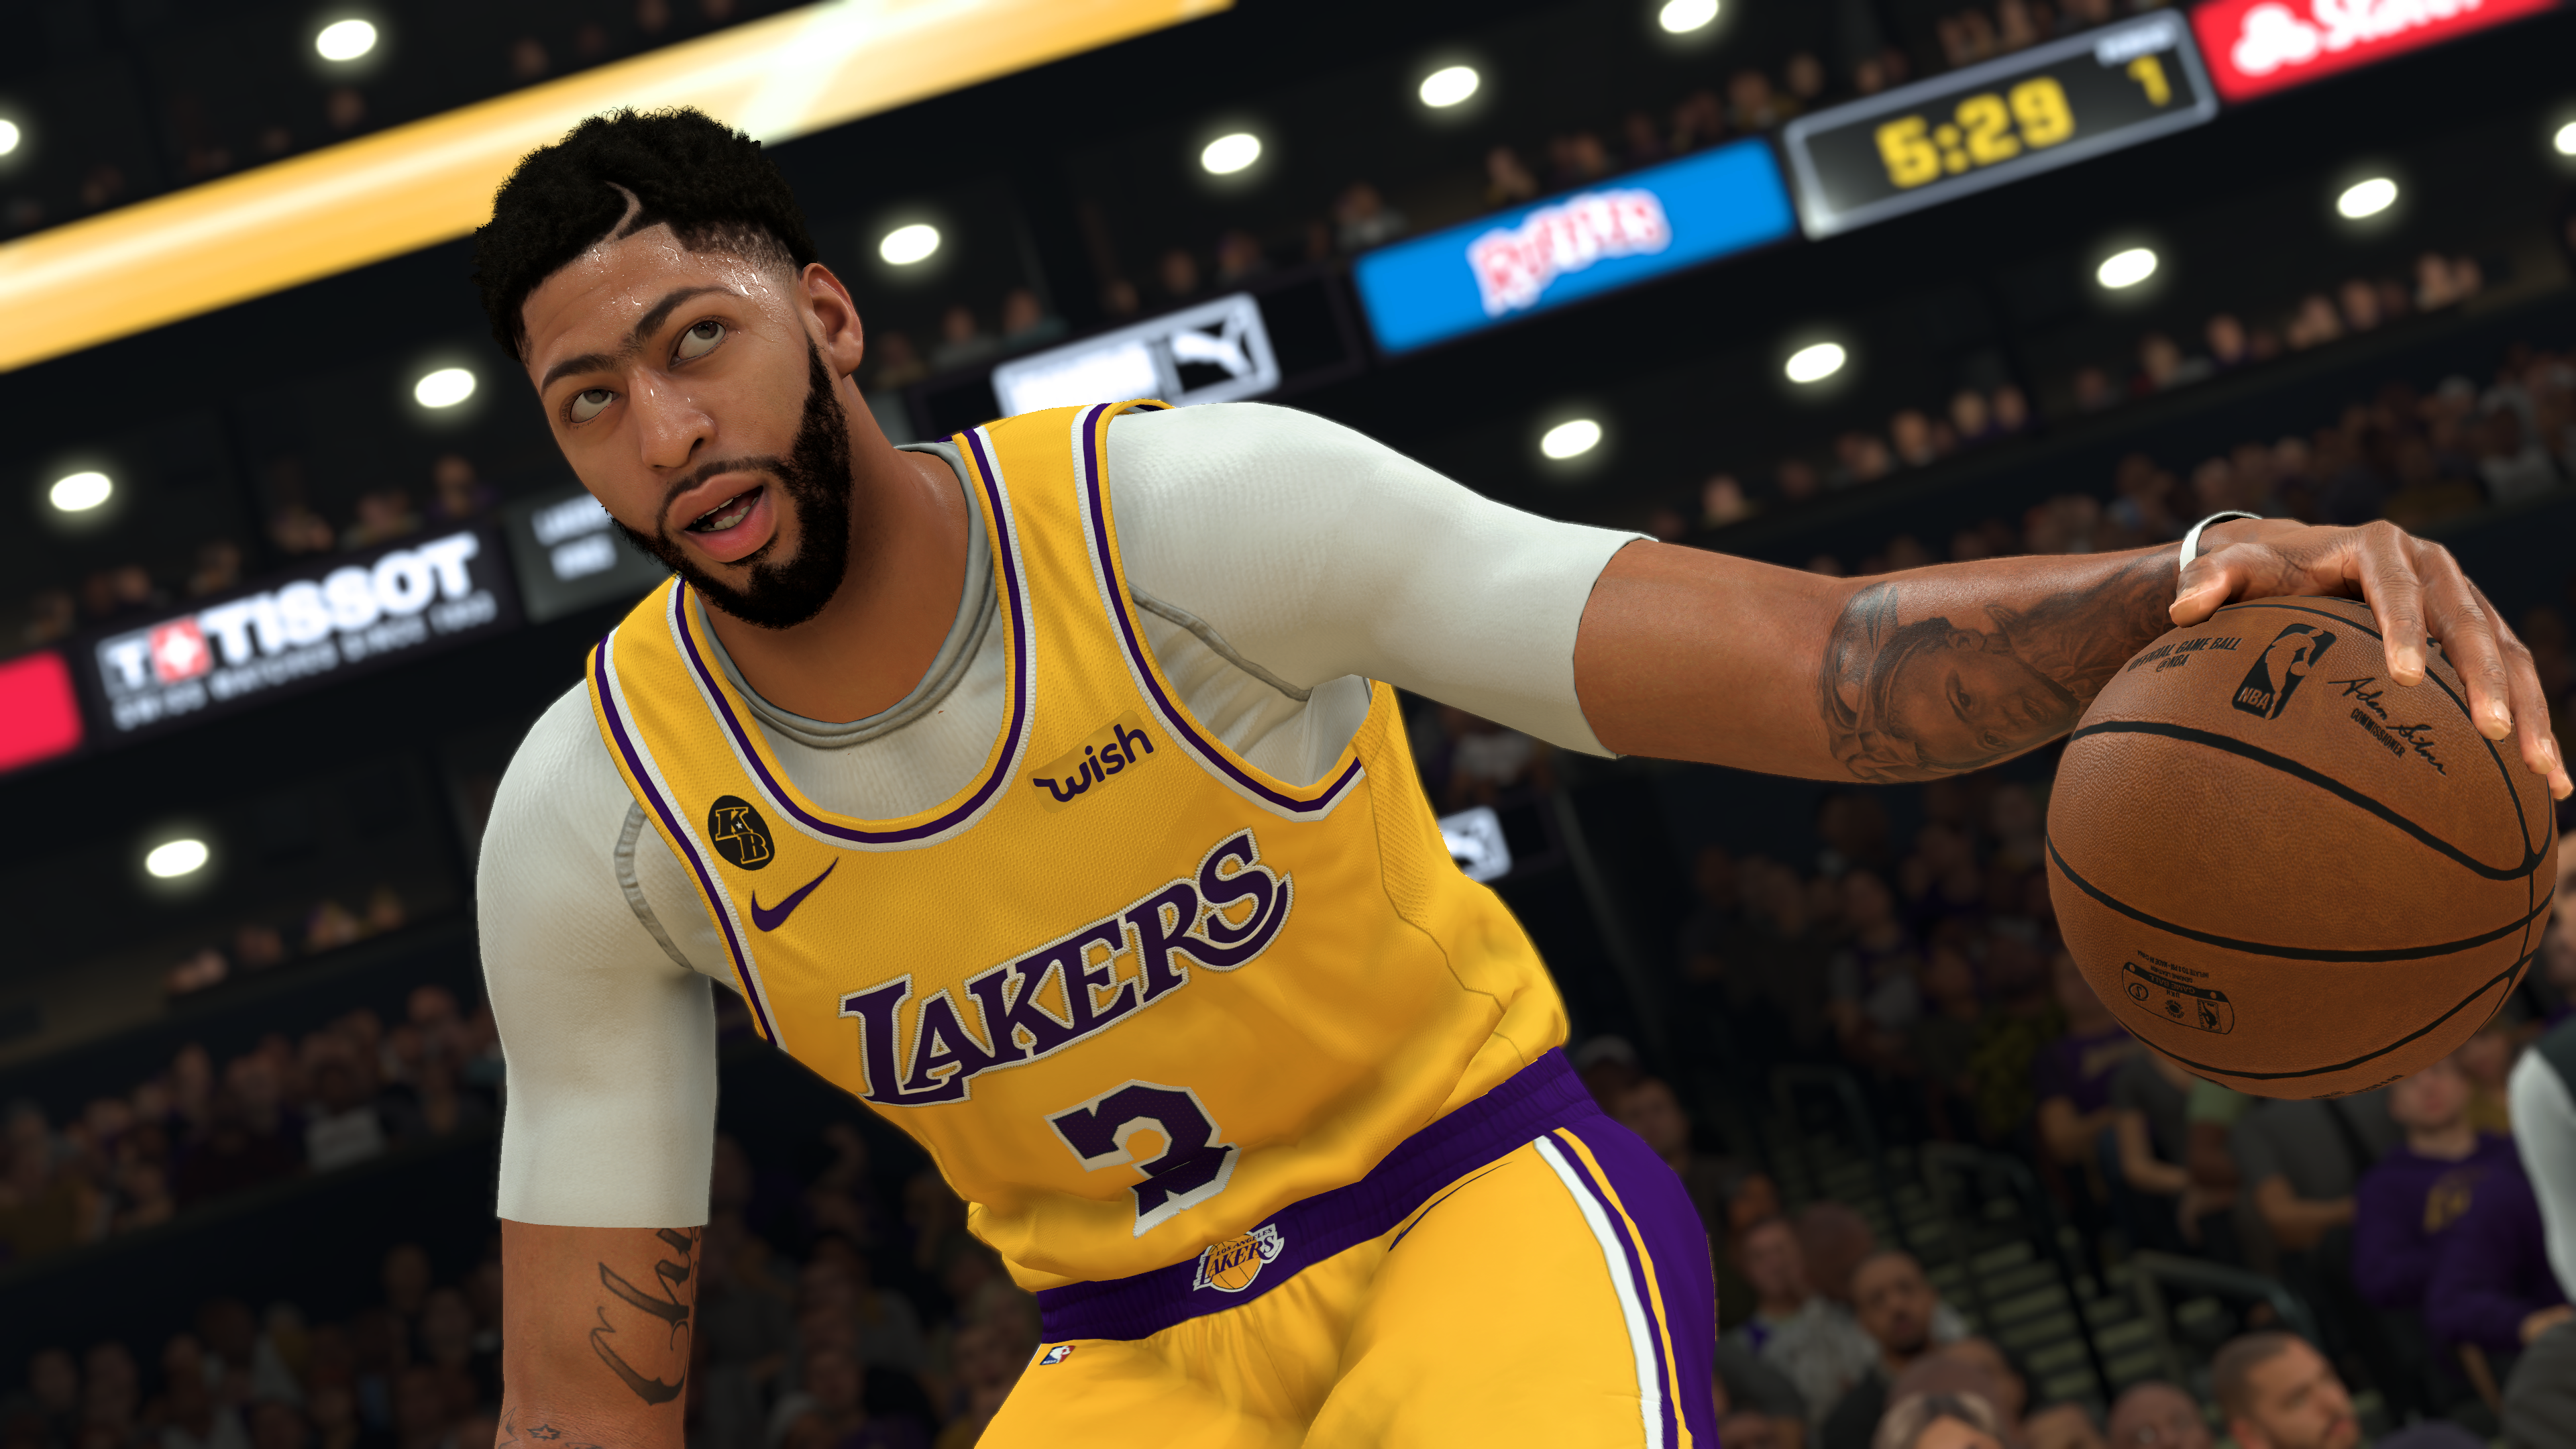 We drafted 2 NBA expansion teams and simulated a year in NBA 2K